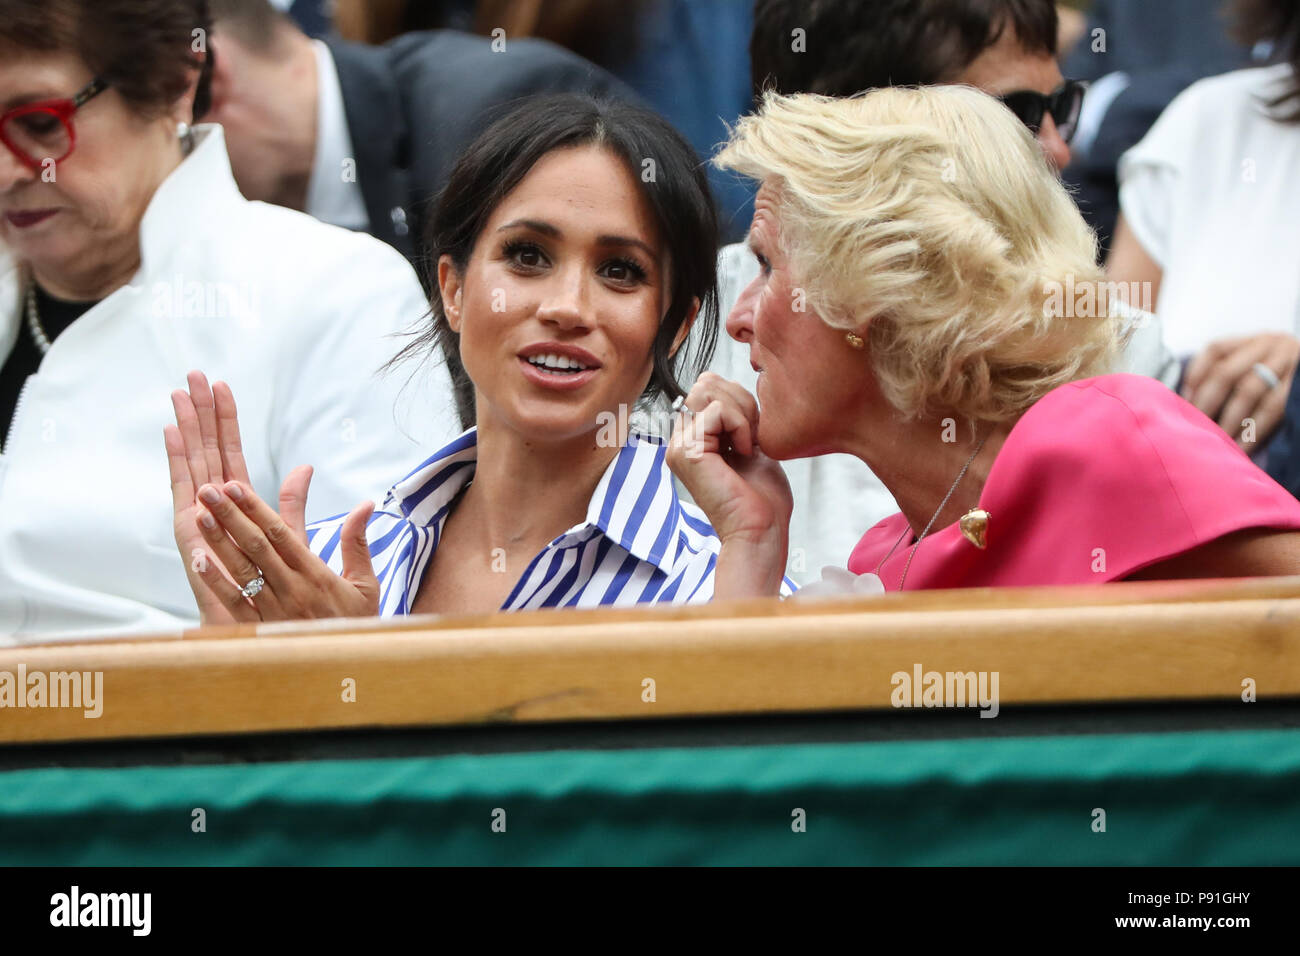 London, UK, 14th July 2018: Meghan, Duchess of Sussex, visiting the men's semifinal at day 12 at the Wimbledon Tennis Championships 2018 at the All England Lawn Tennis and Croquet Club in London. Credit: Frank Molter/Alamy Live news Stock Photo